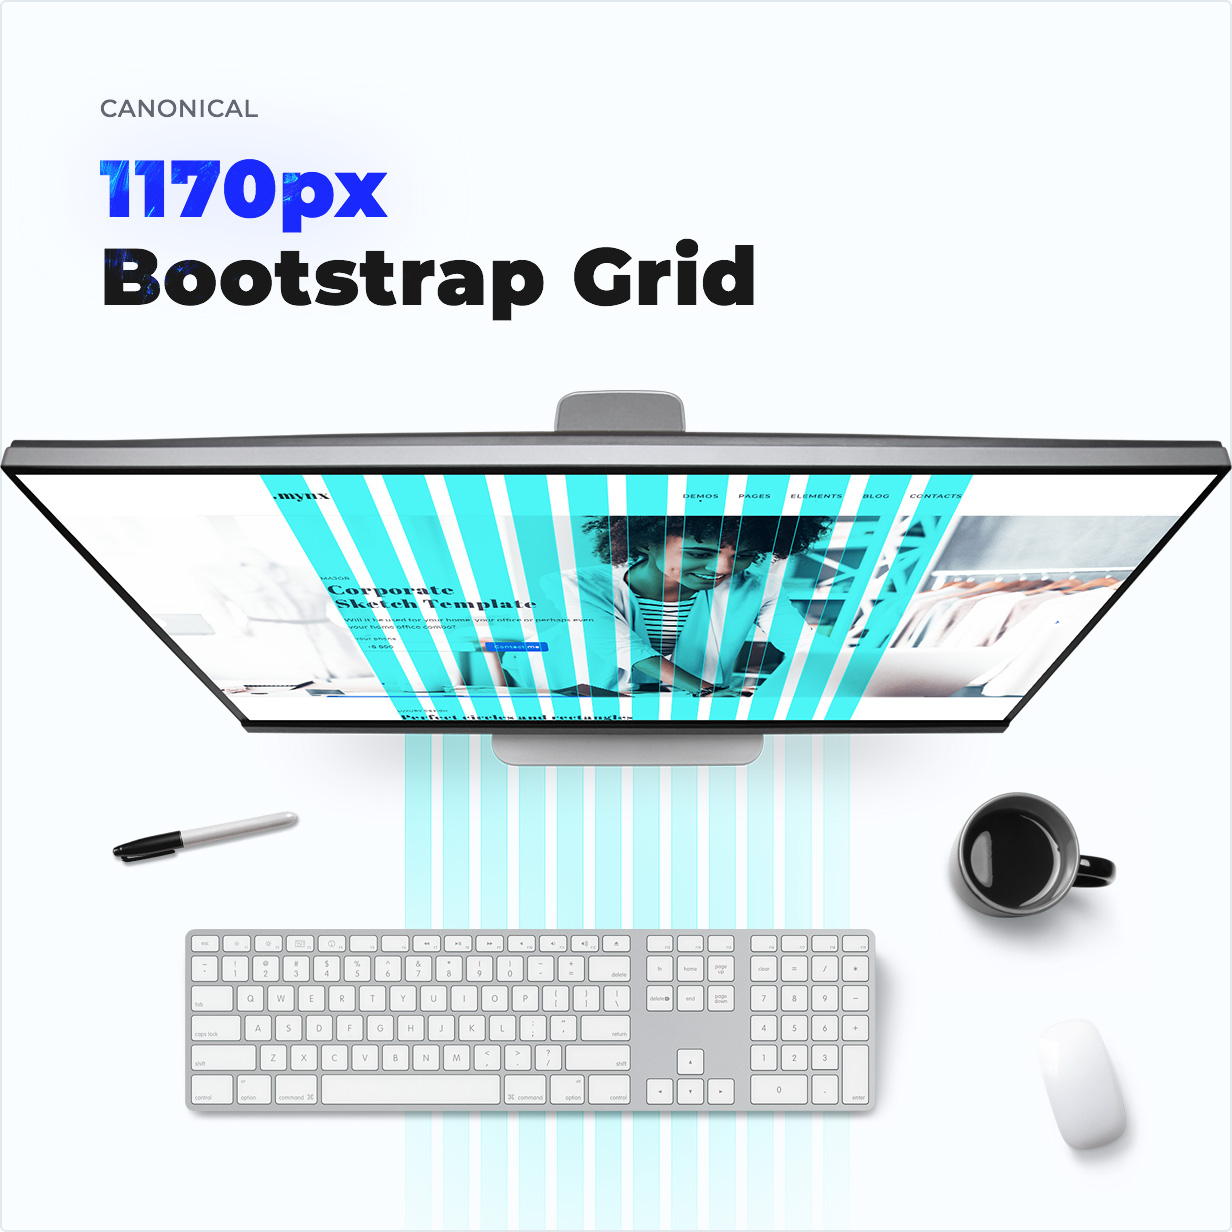 Canonical 1170px Bootstrap Grid